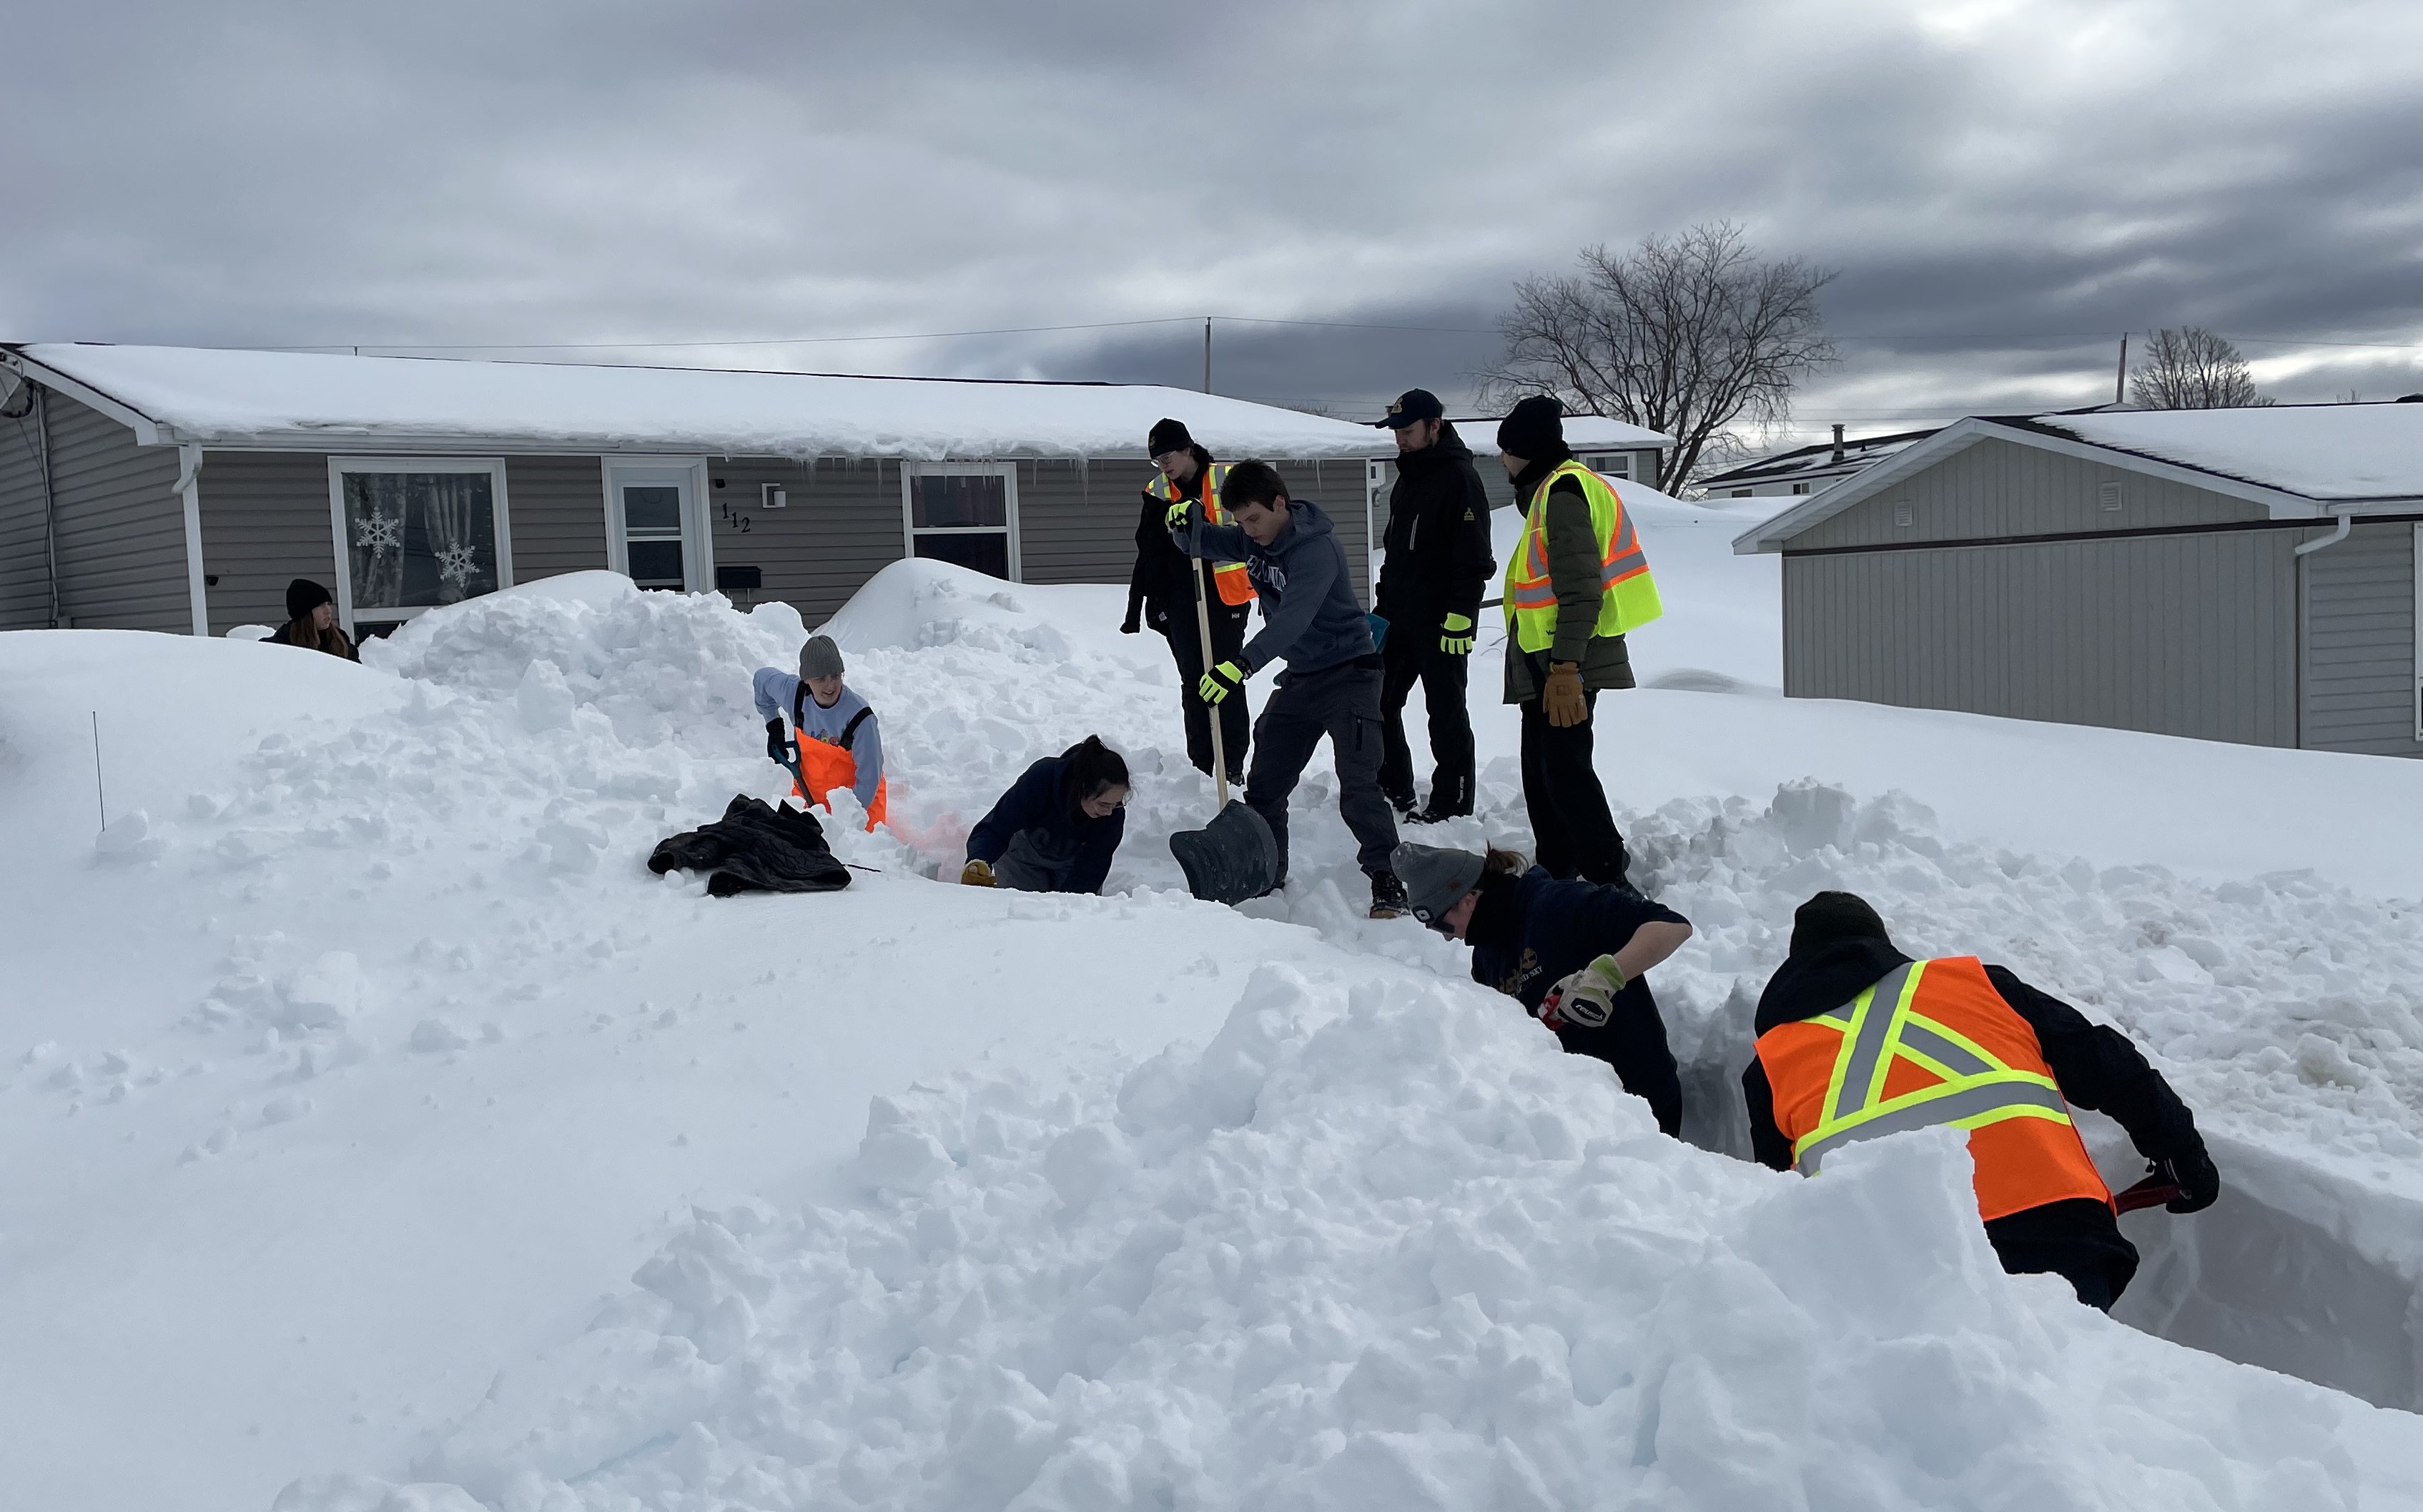 Coast guard cadets called in to help as Cape Breton digs out from record snowfall